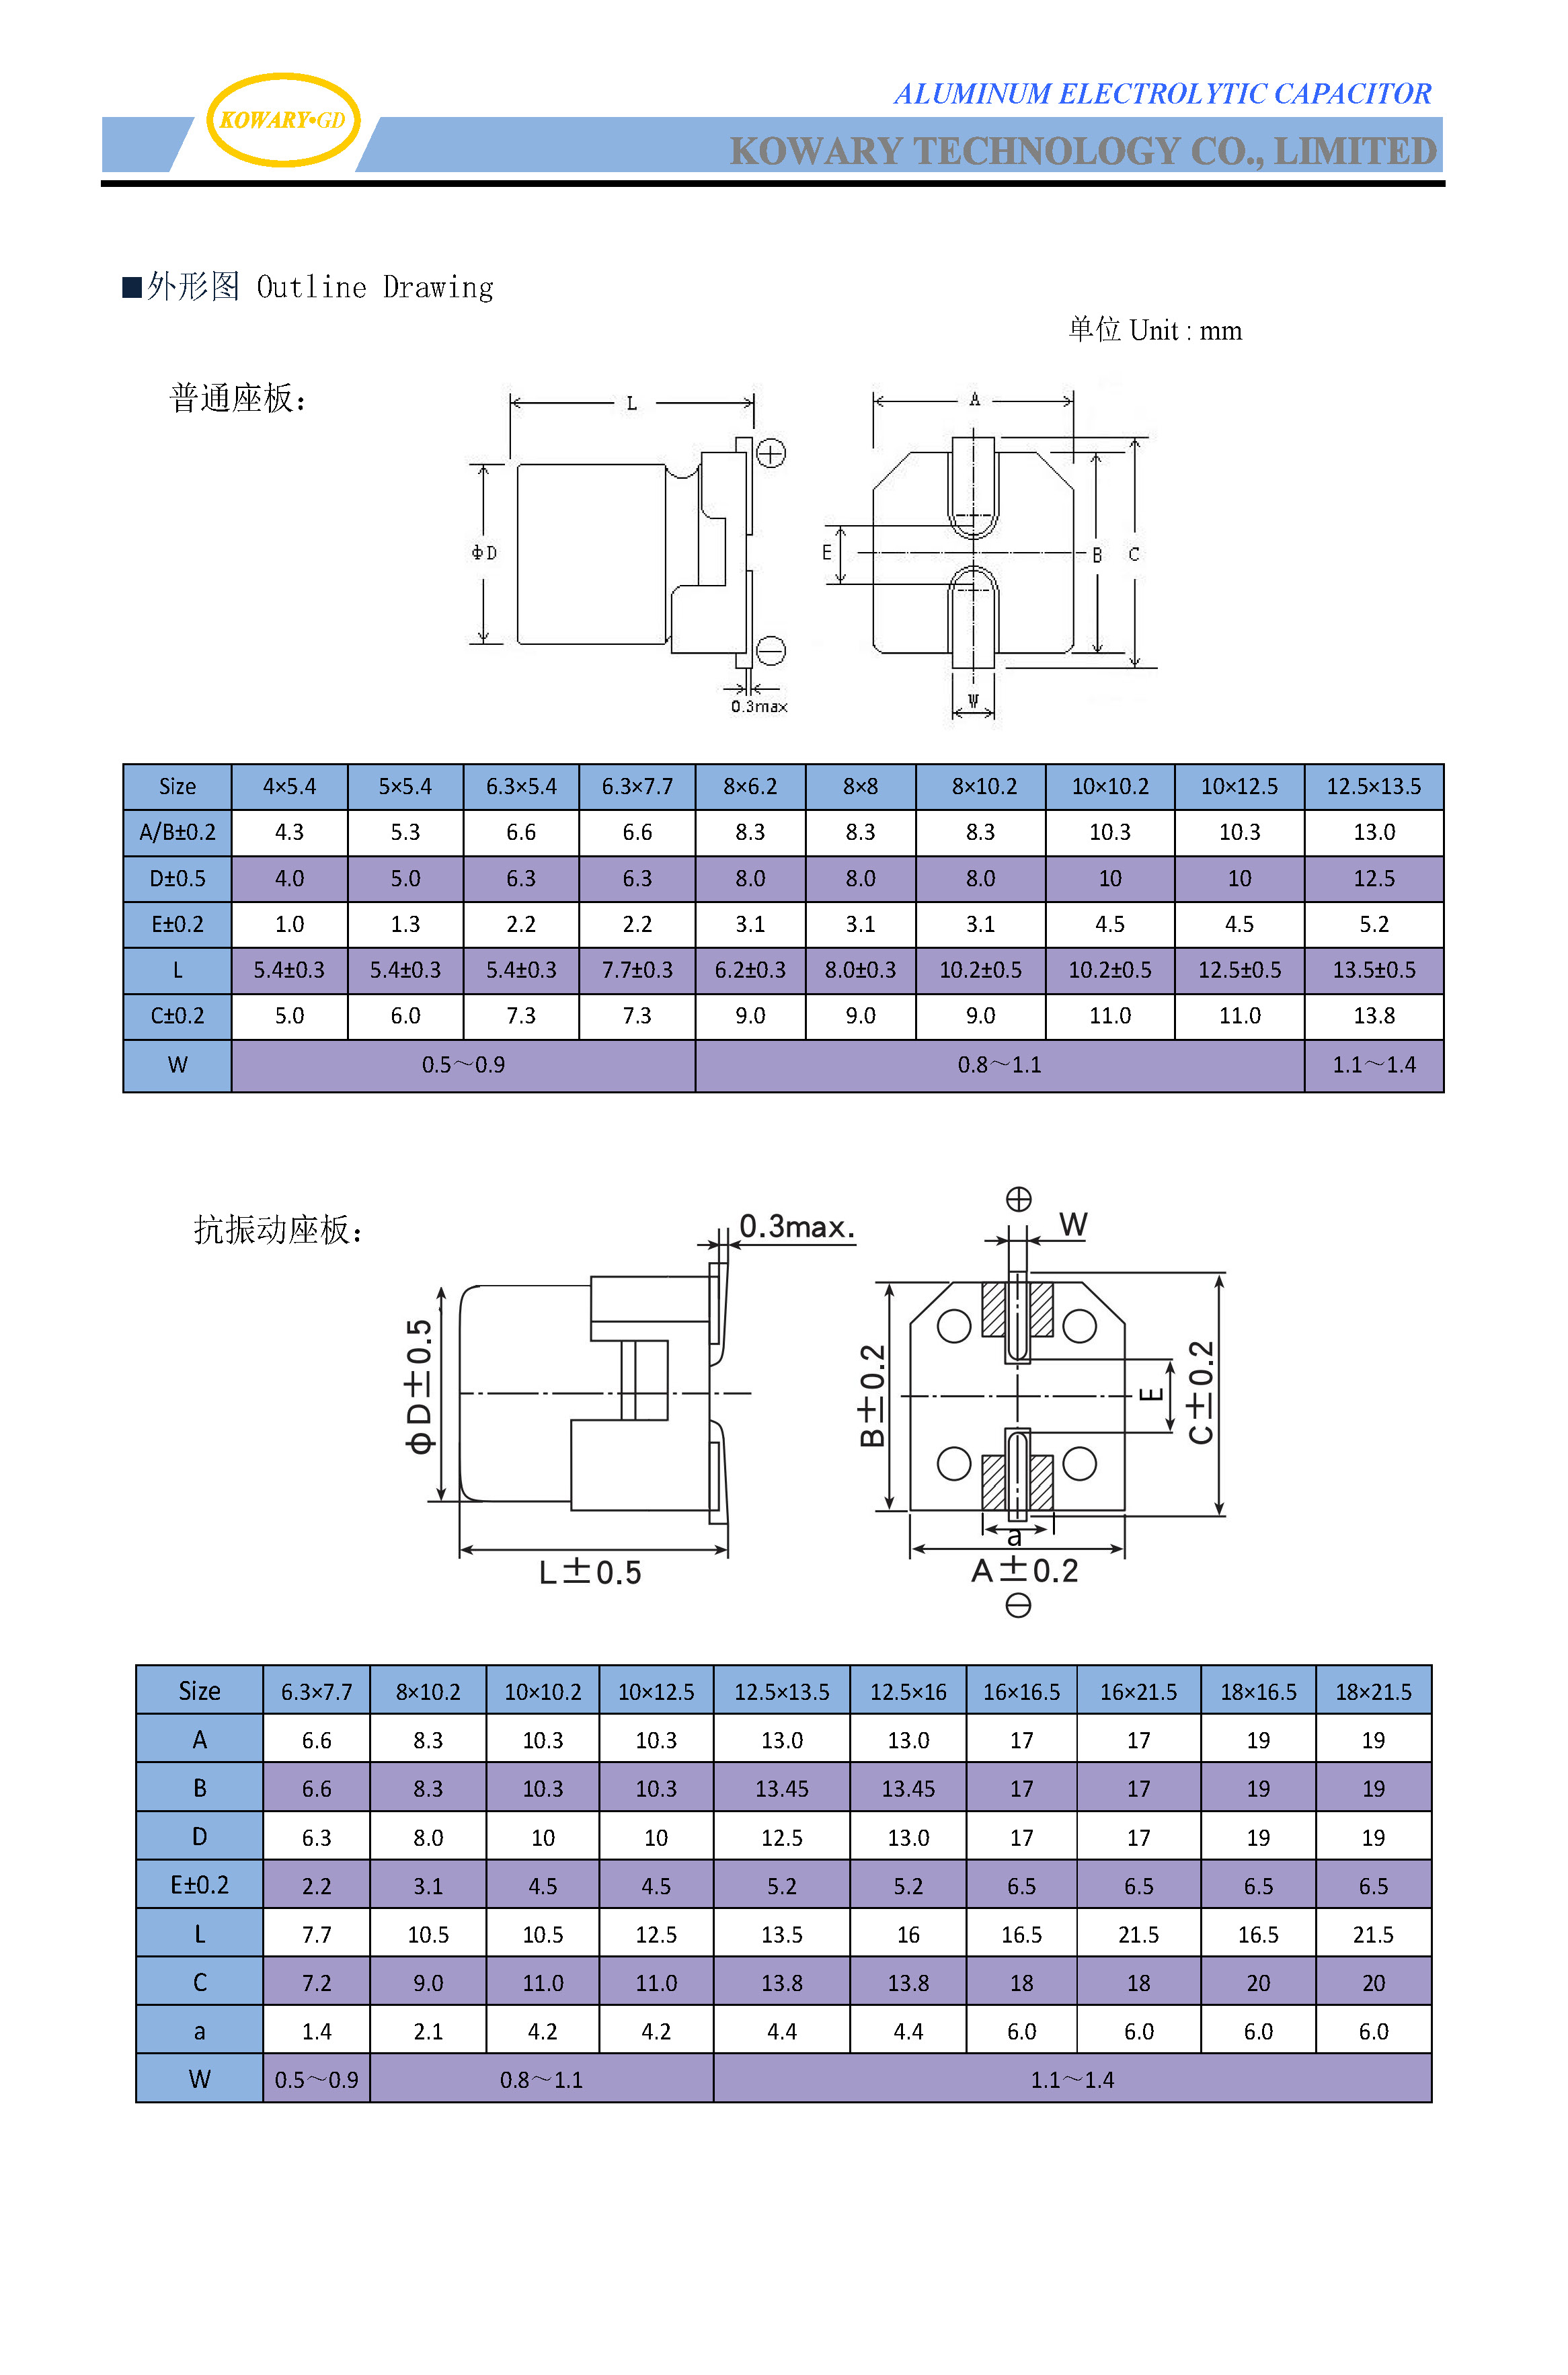 VZ2 / Aluminum Electrolytic Capacitor of V-chip Type(图2)